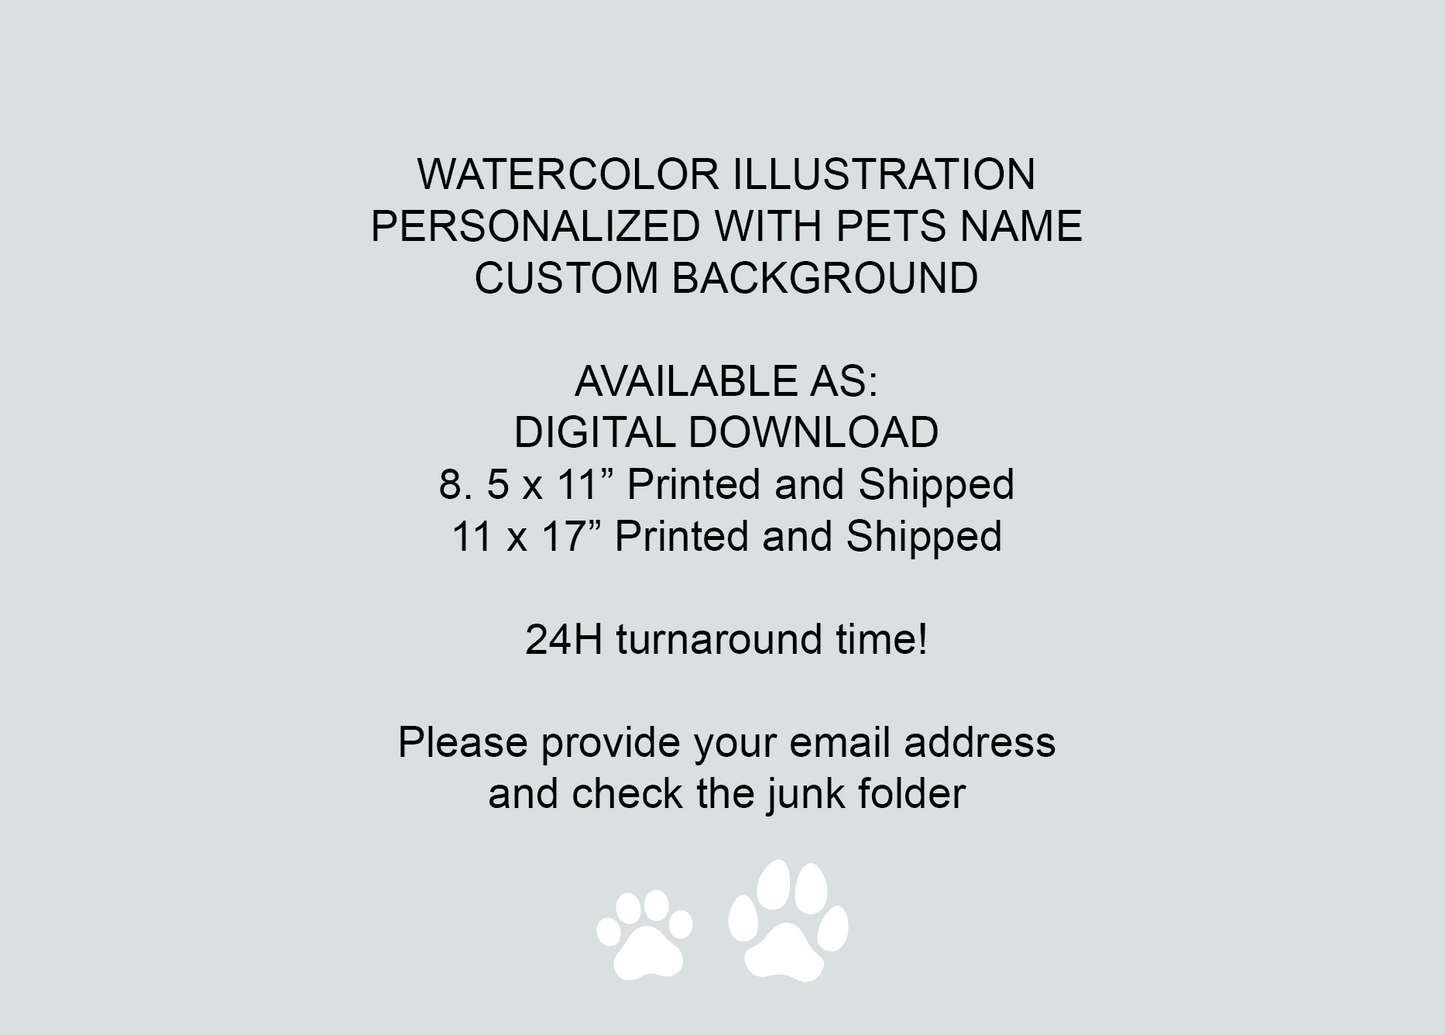 Custom Pet Portrait Art Print Personalized Pet Artwork from Picture Printed and Shipped